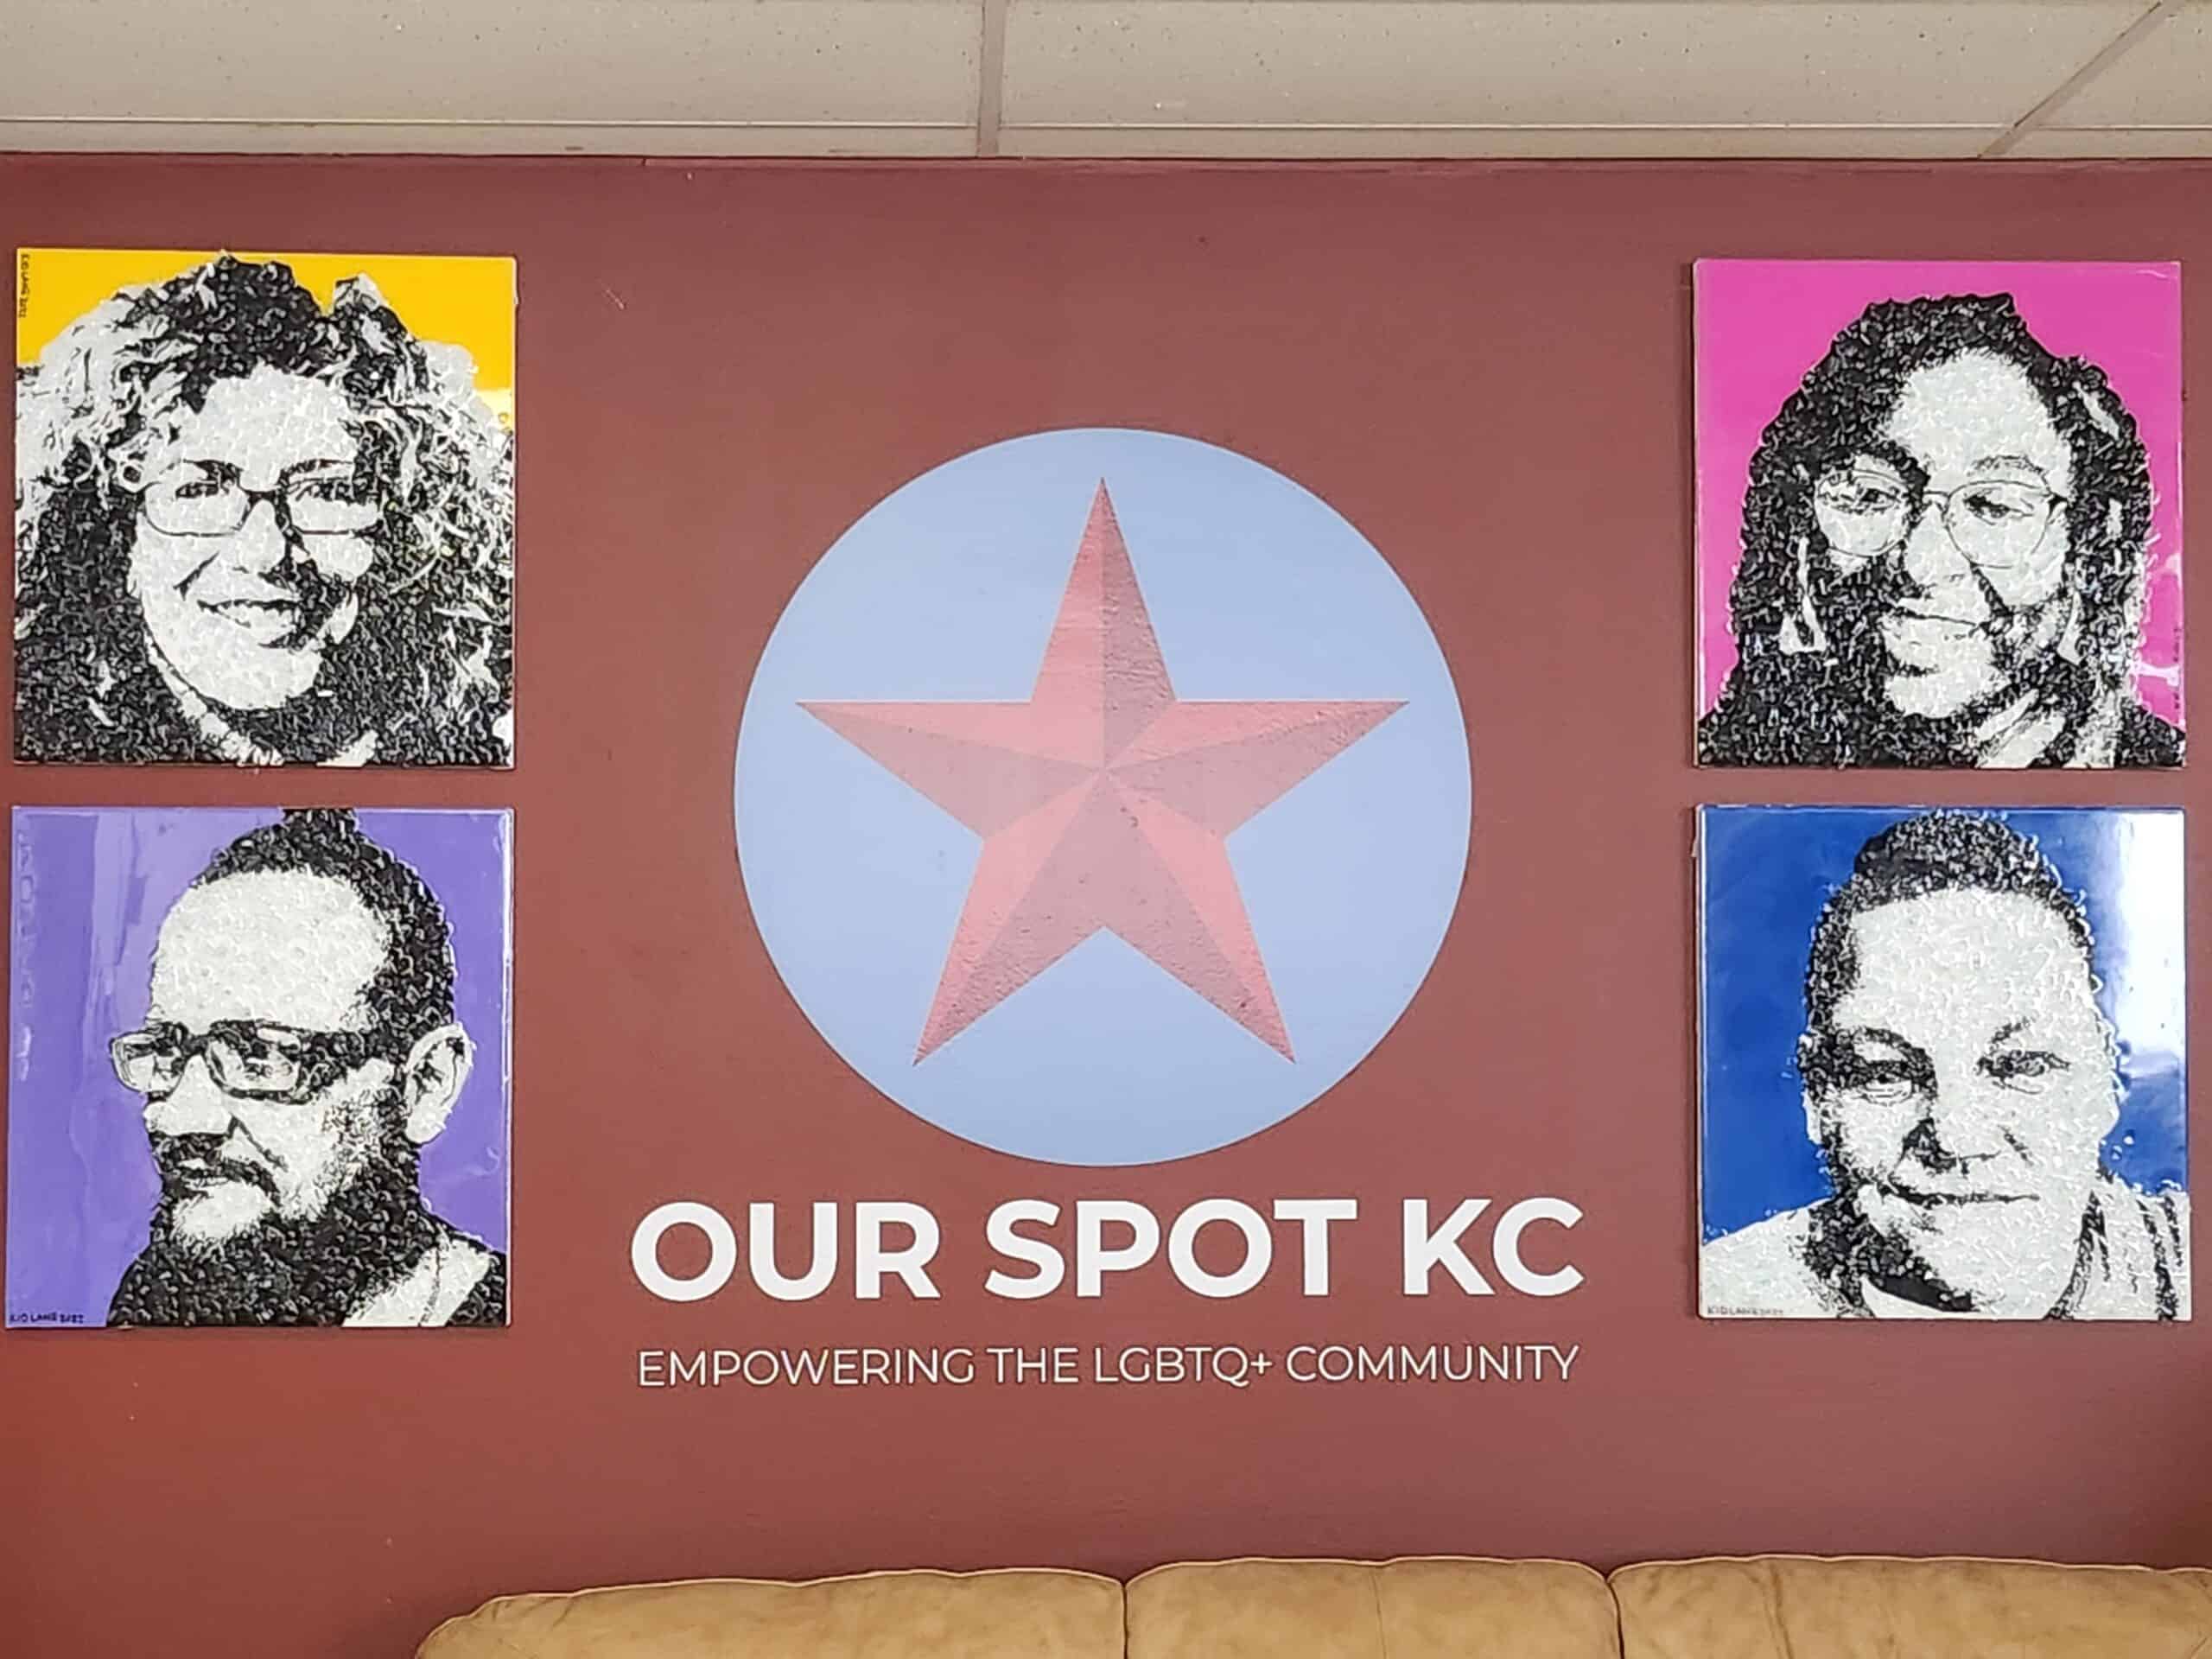 The Our Spot KC logo, a red star on a blue circle, against a dark red background. It is surrounded on either side by colorful portraits of smiling people.